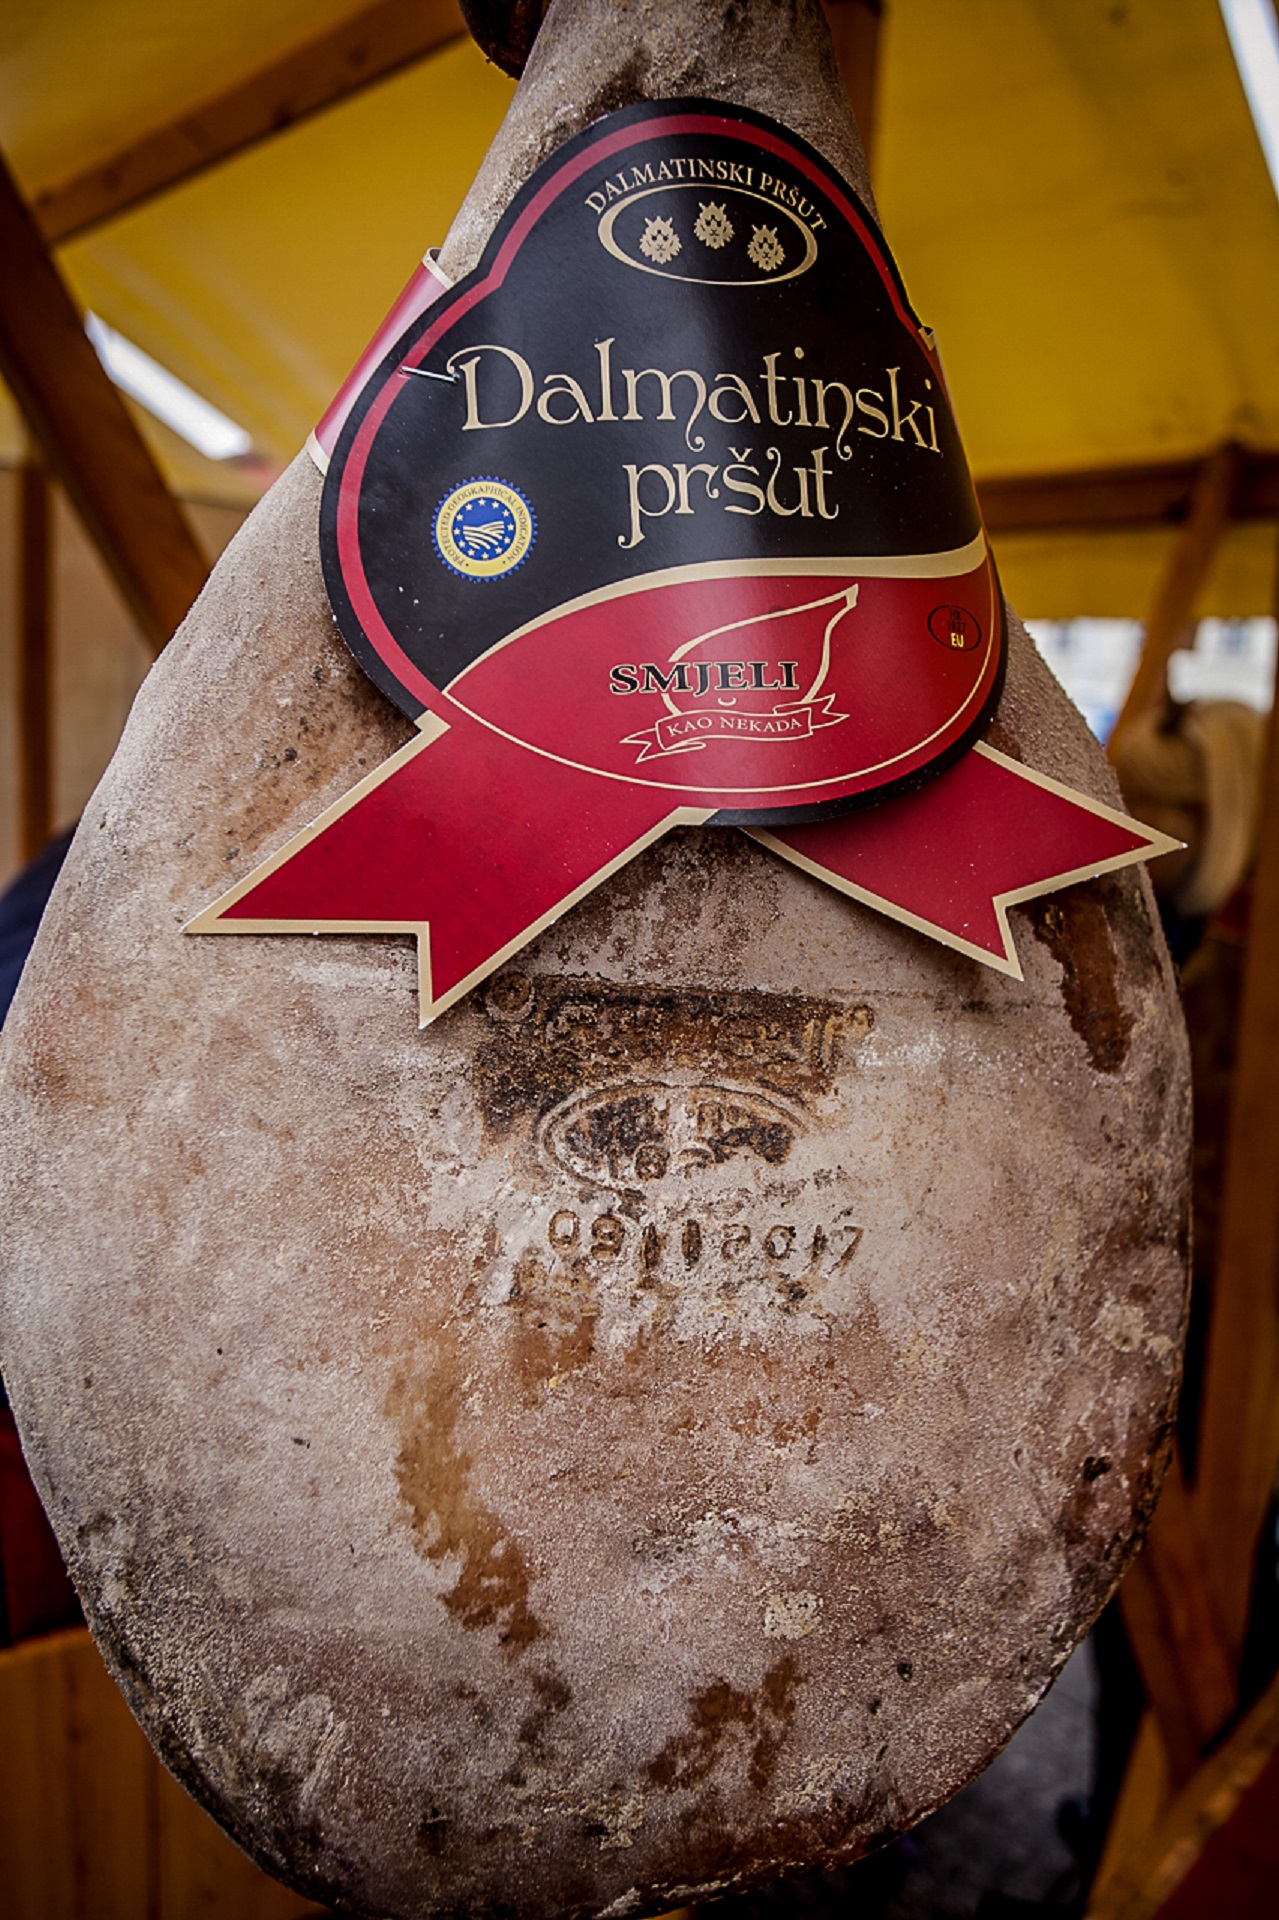 Dugopolje home to the most awarded pršut in Croatia - what is the secret?